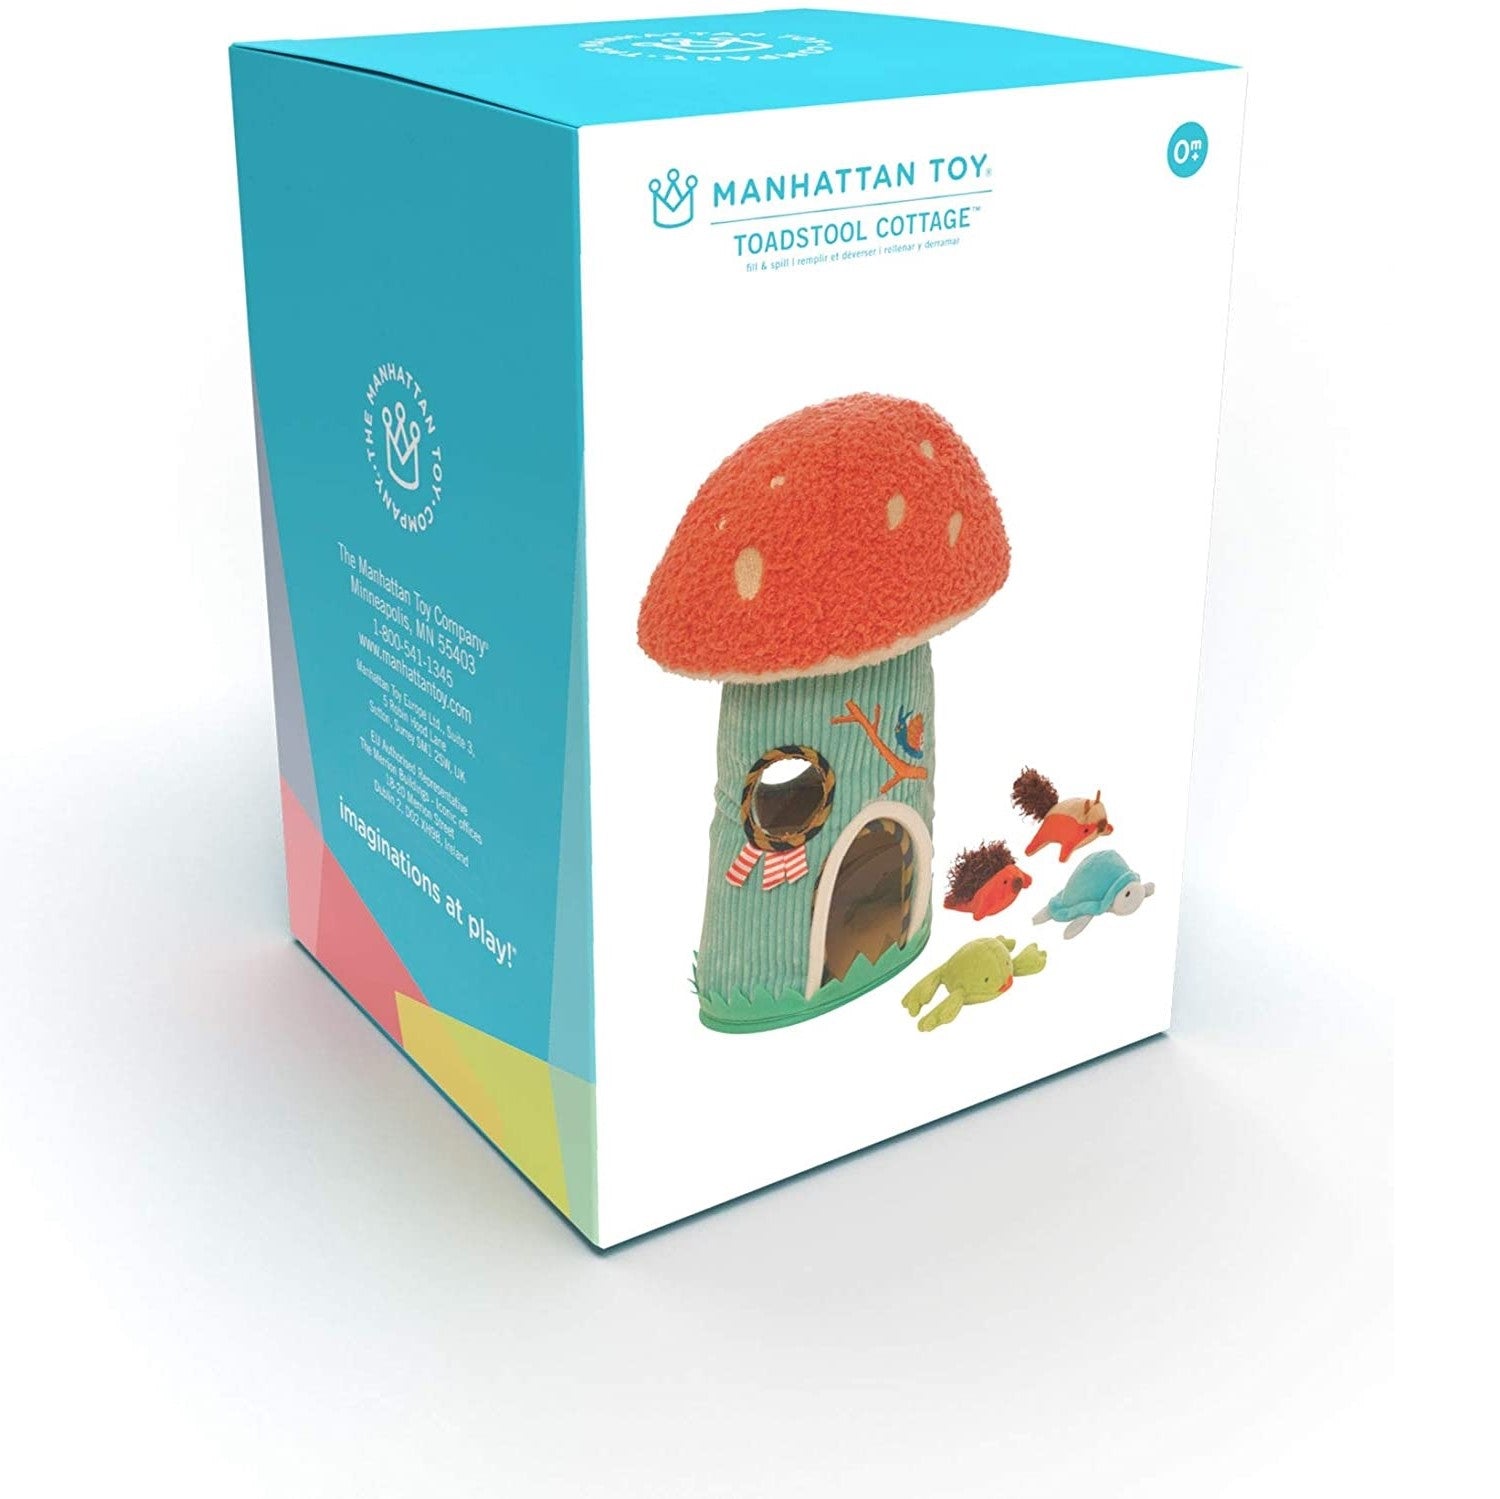 manhattan toy toadstool cottage fill & spill